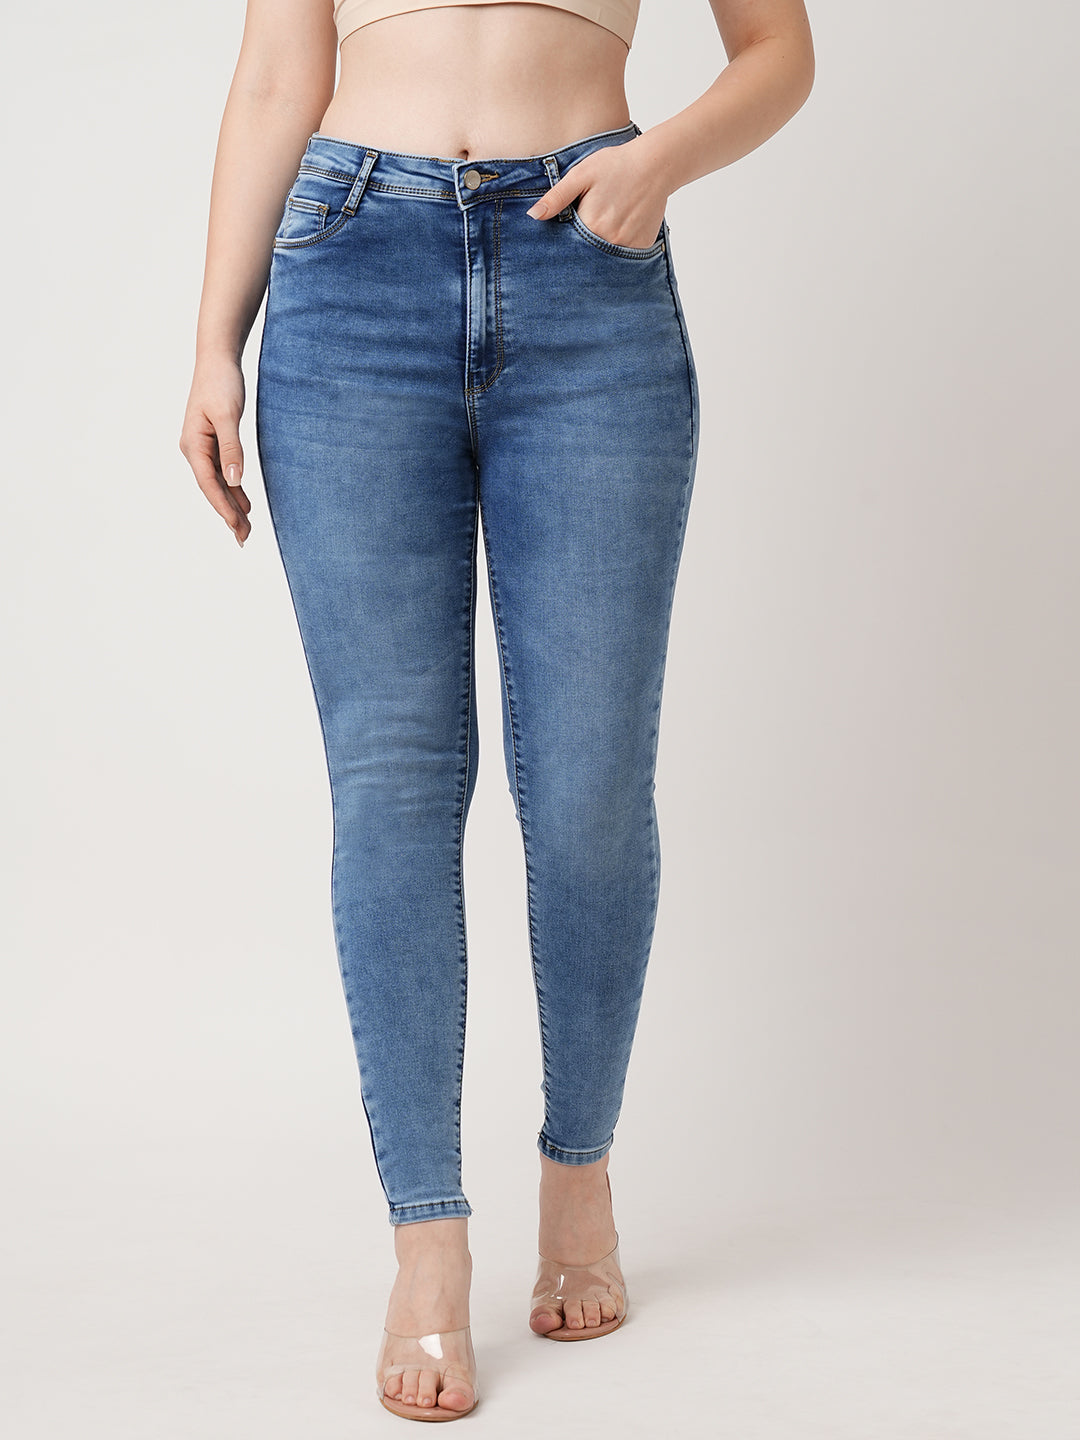 K504 Sky High Rise Skinny Fit Jeans